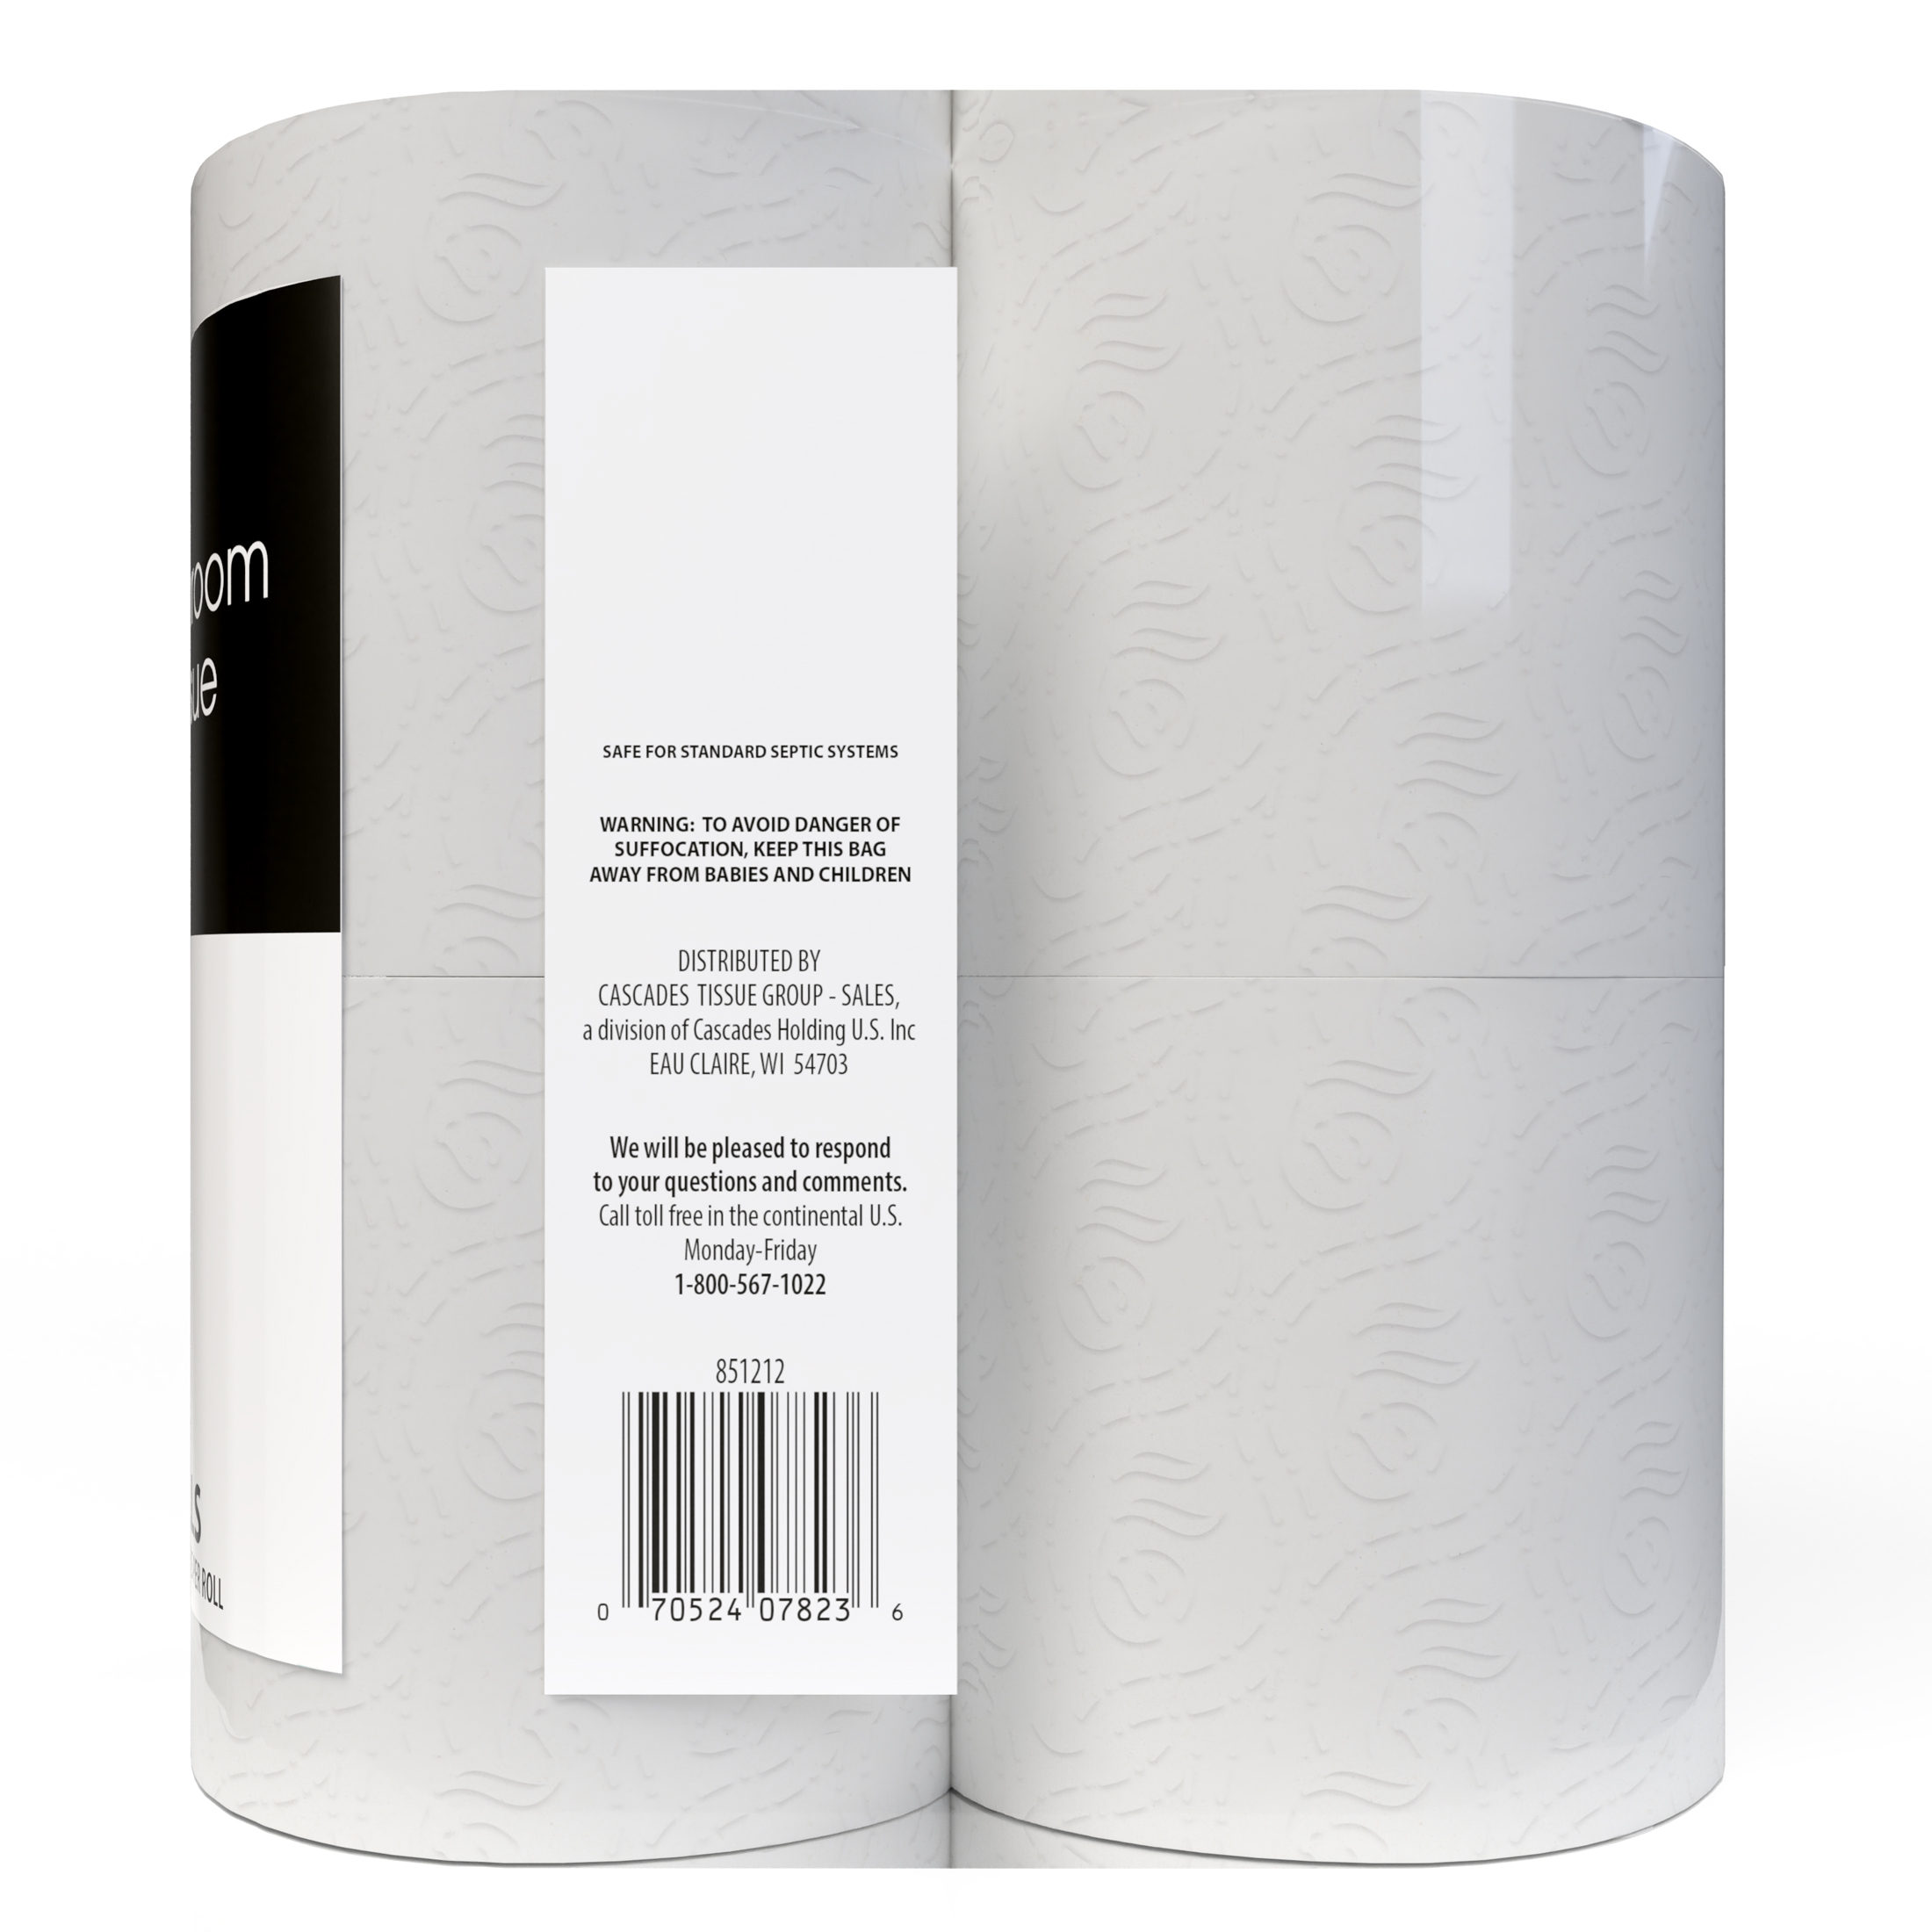 Toilet Paper, 4 Rolls, 150 2-Ply Sheets per Roll - image 3 of 4